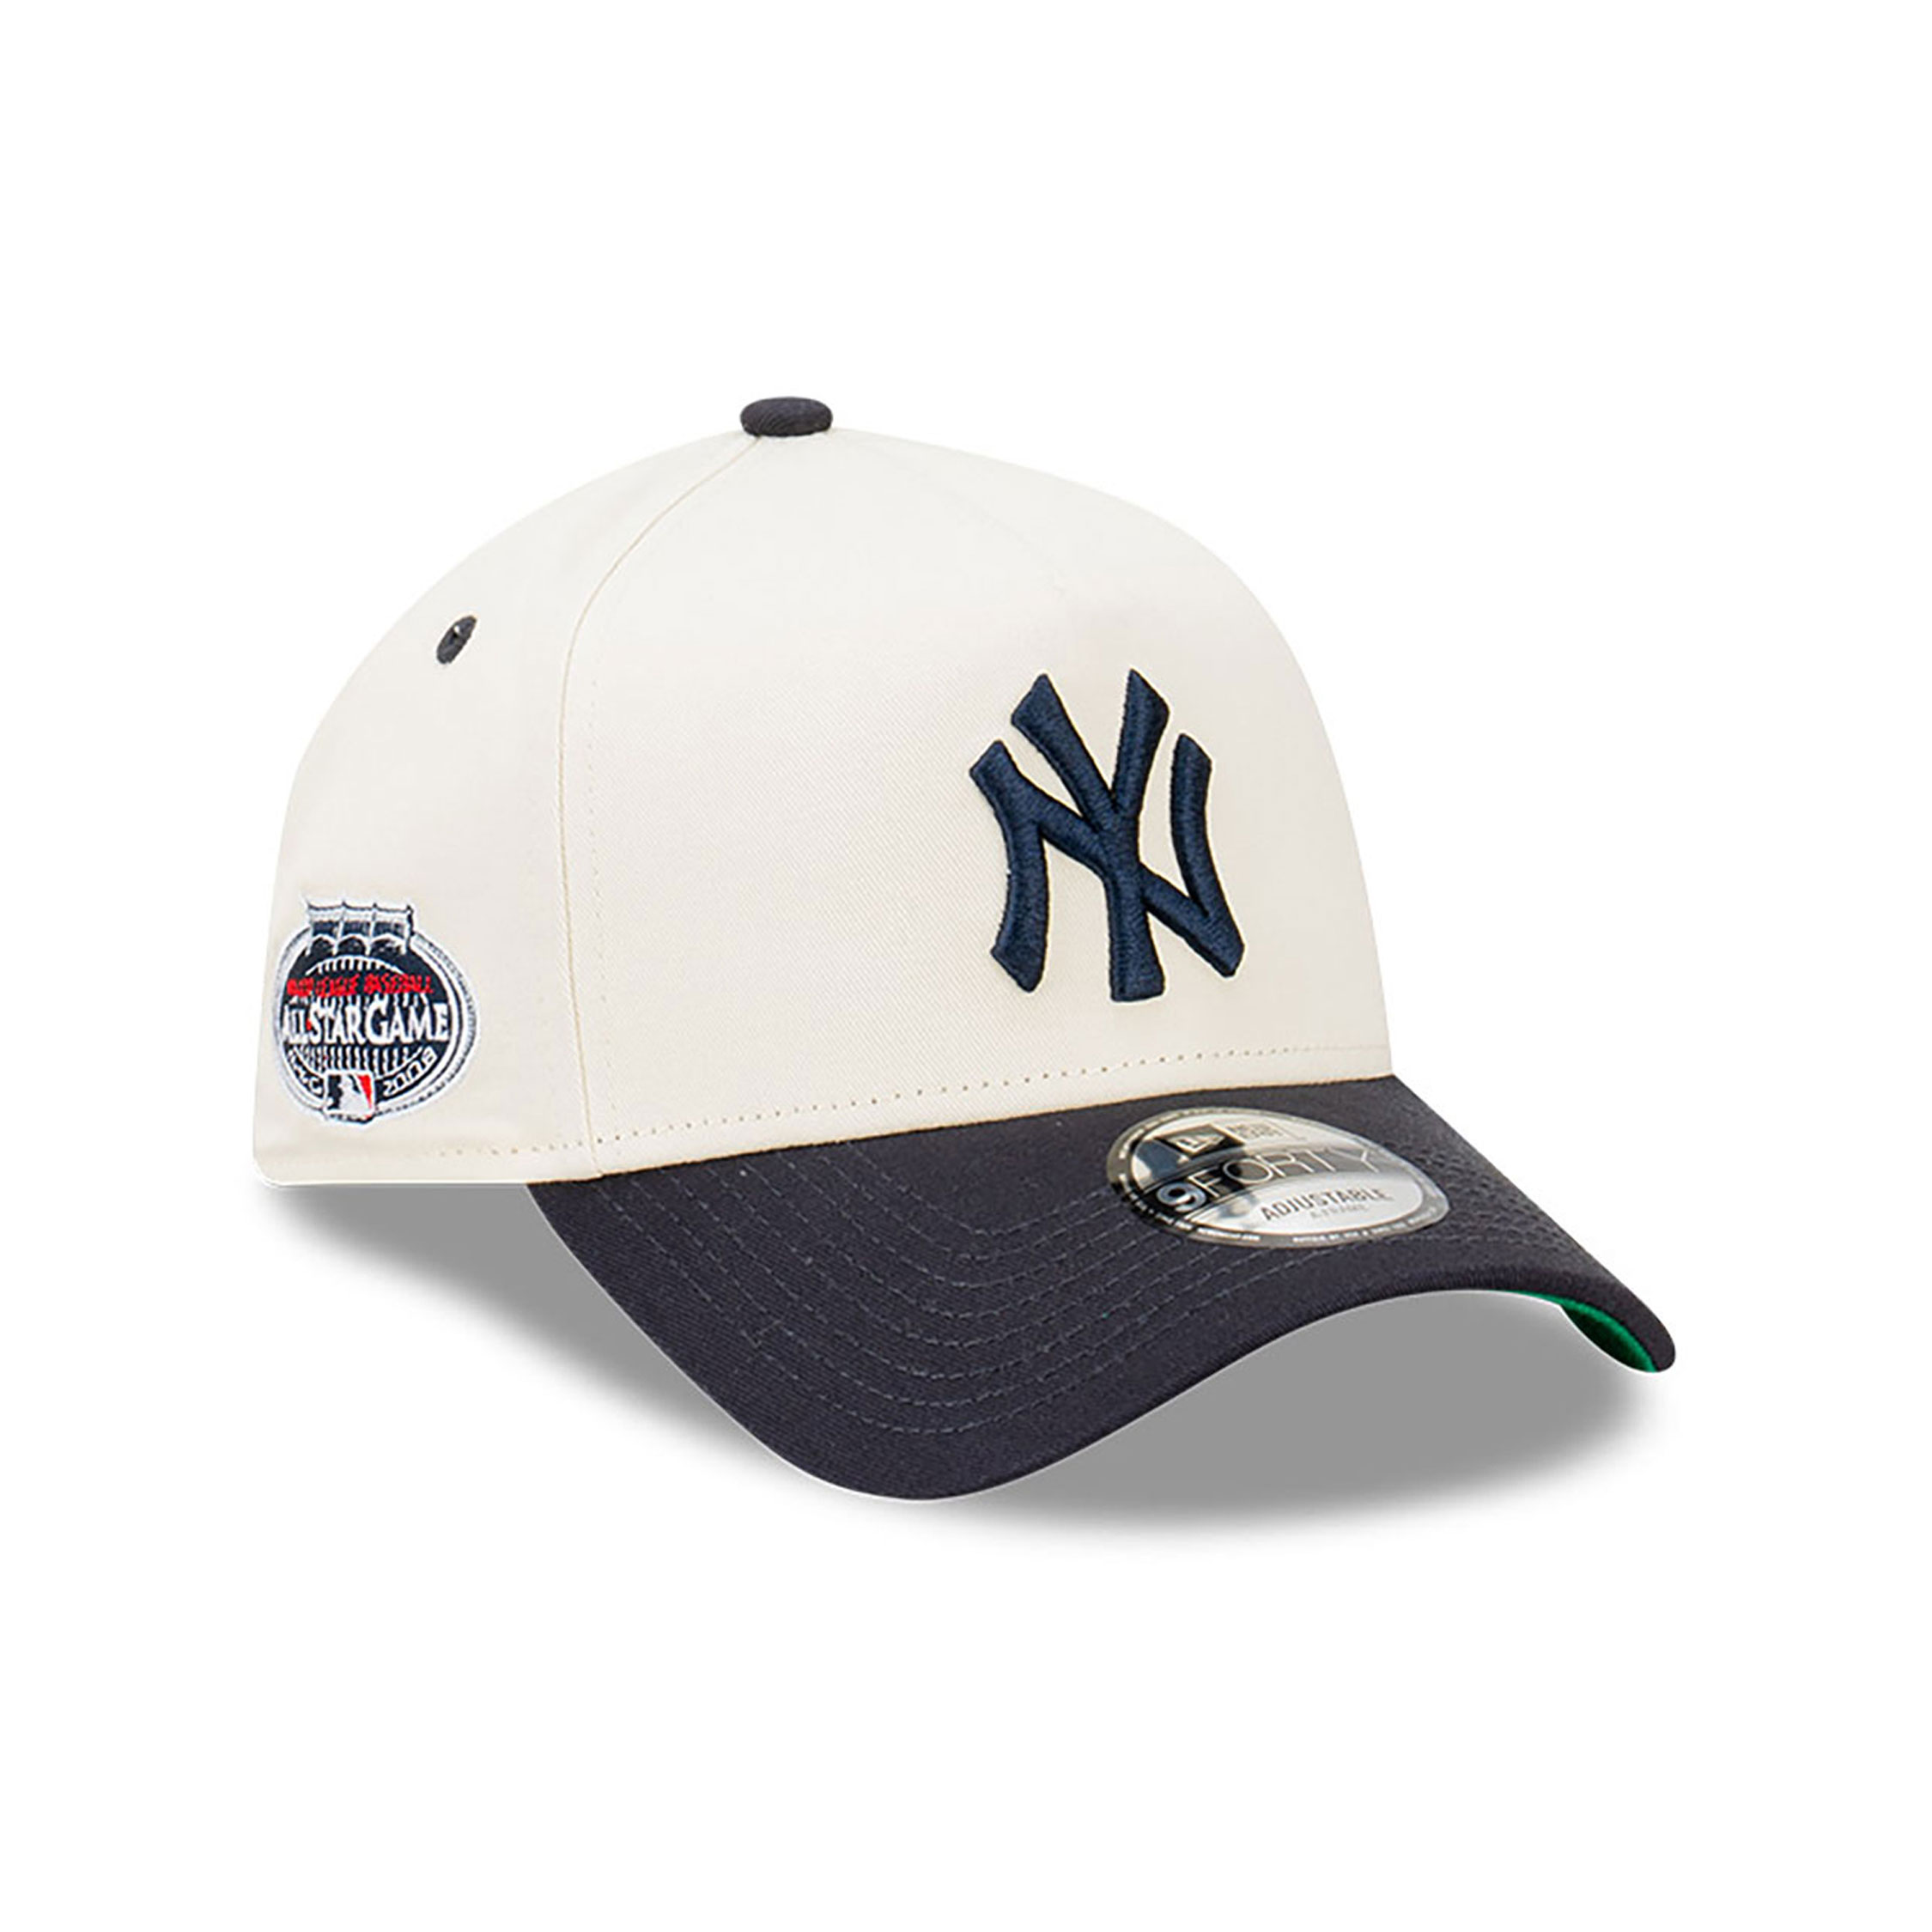 New York Yankees All Star Game Vintage White 9FORTY A-Frame Adjustable Cap